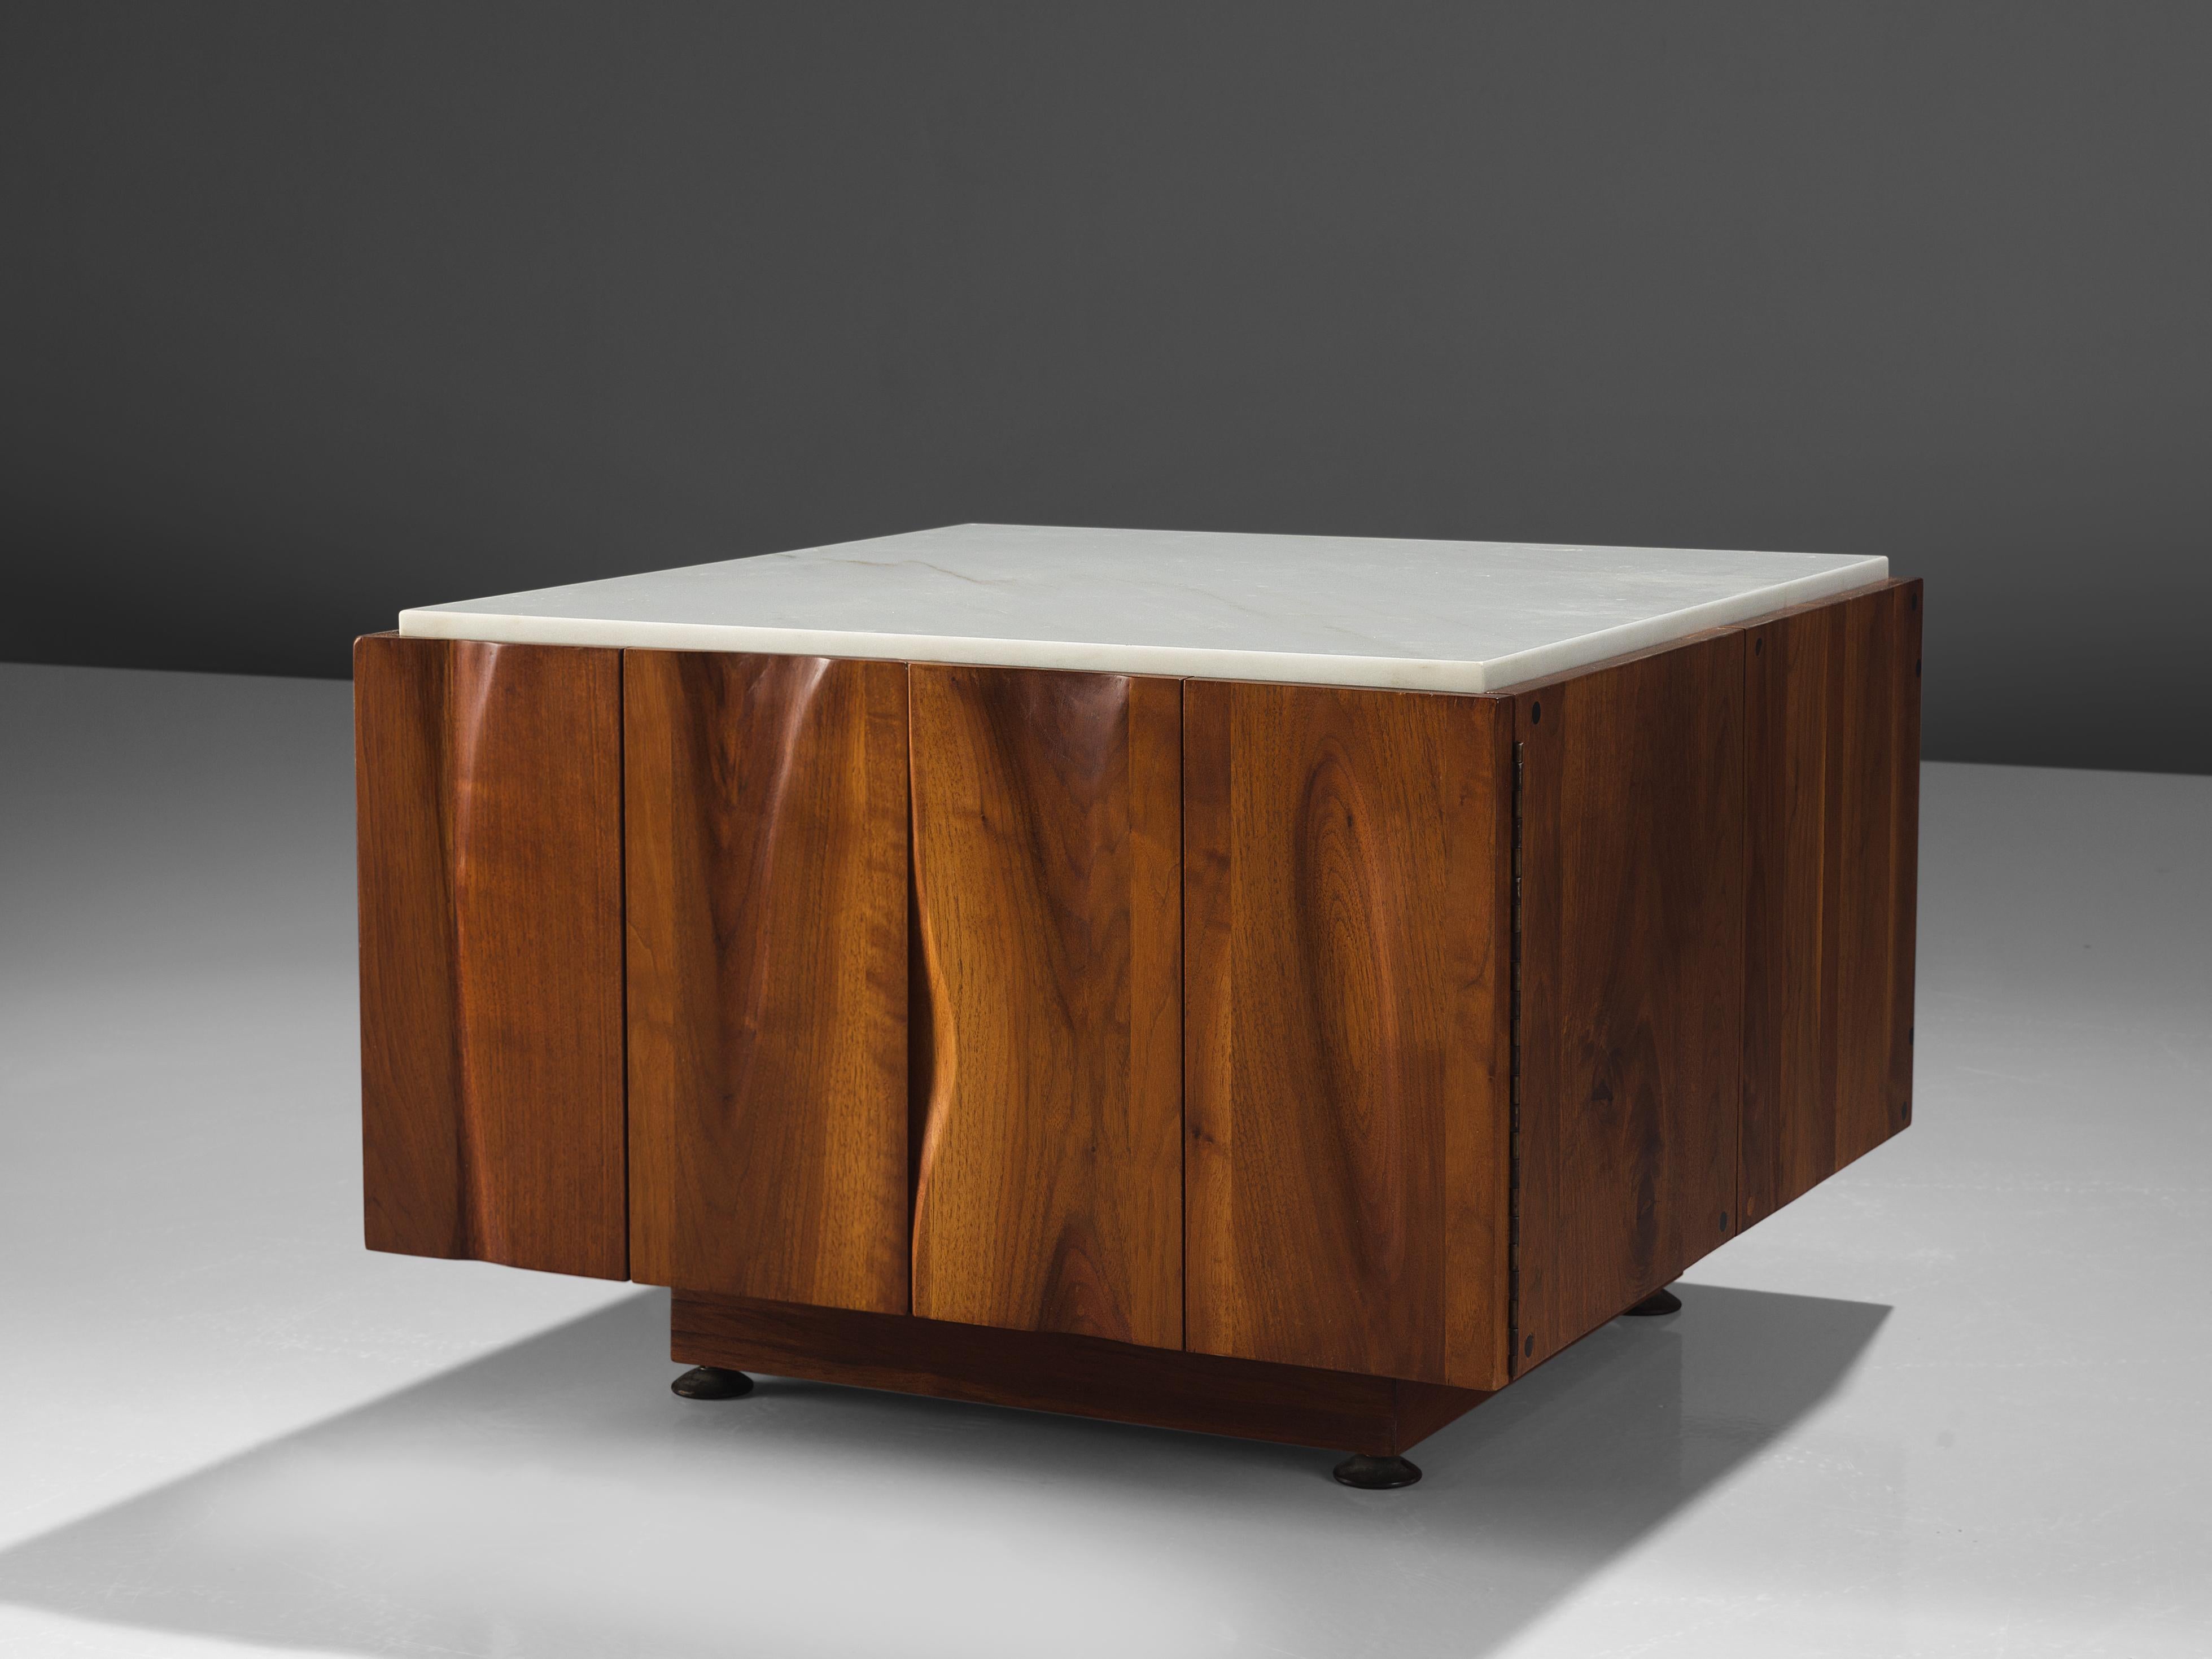 Phillip Lloyd Powell, coffee table with storage space, walnut and marble, New Hope, PA, United States, 1962

This exquisite coffee table is designed by Phillip Lloyd Powell and executed in solid walnut and a white marble as a top that balances the